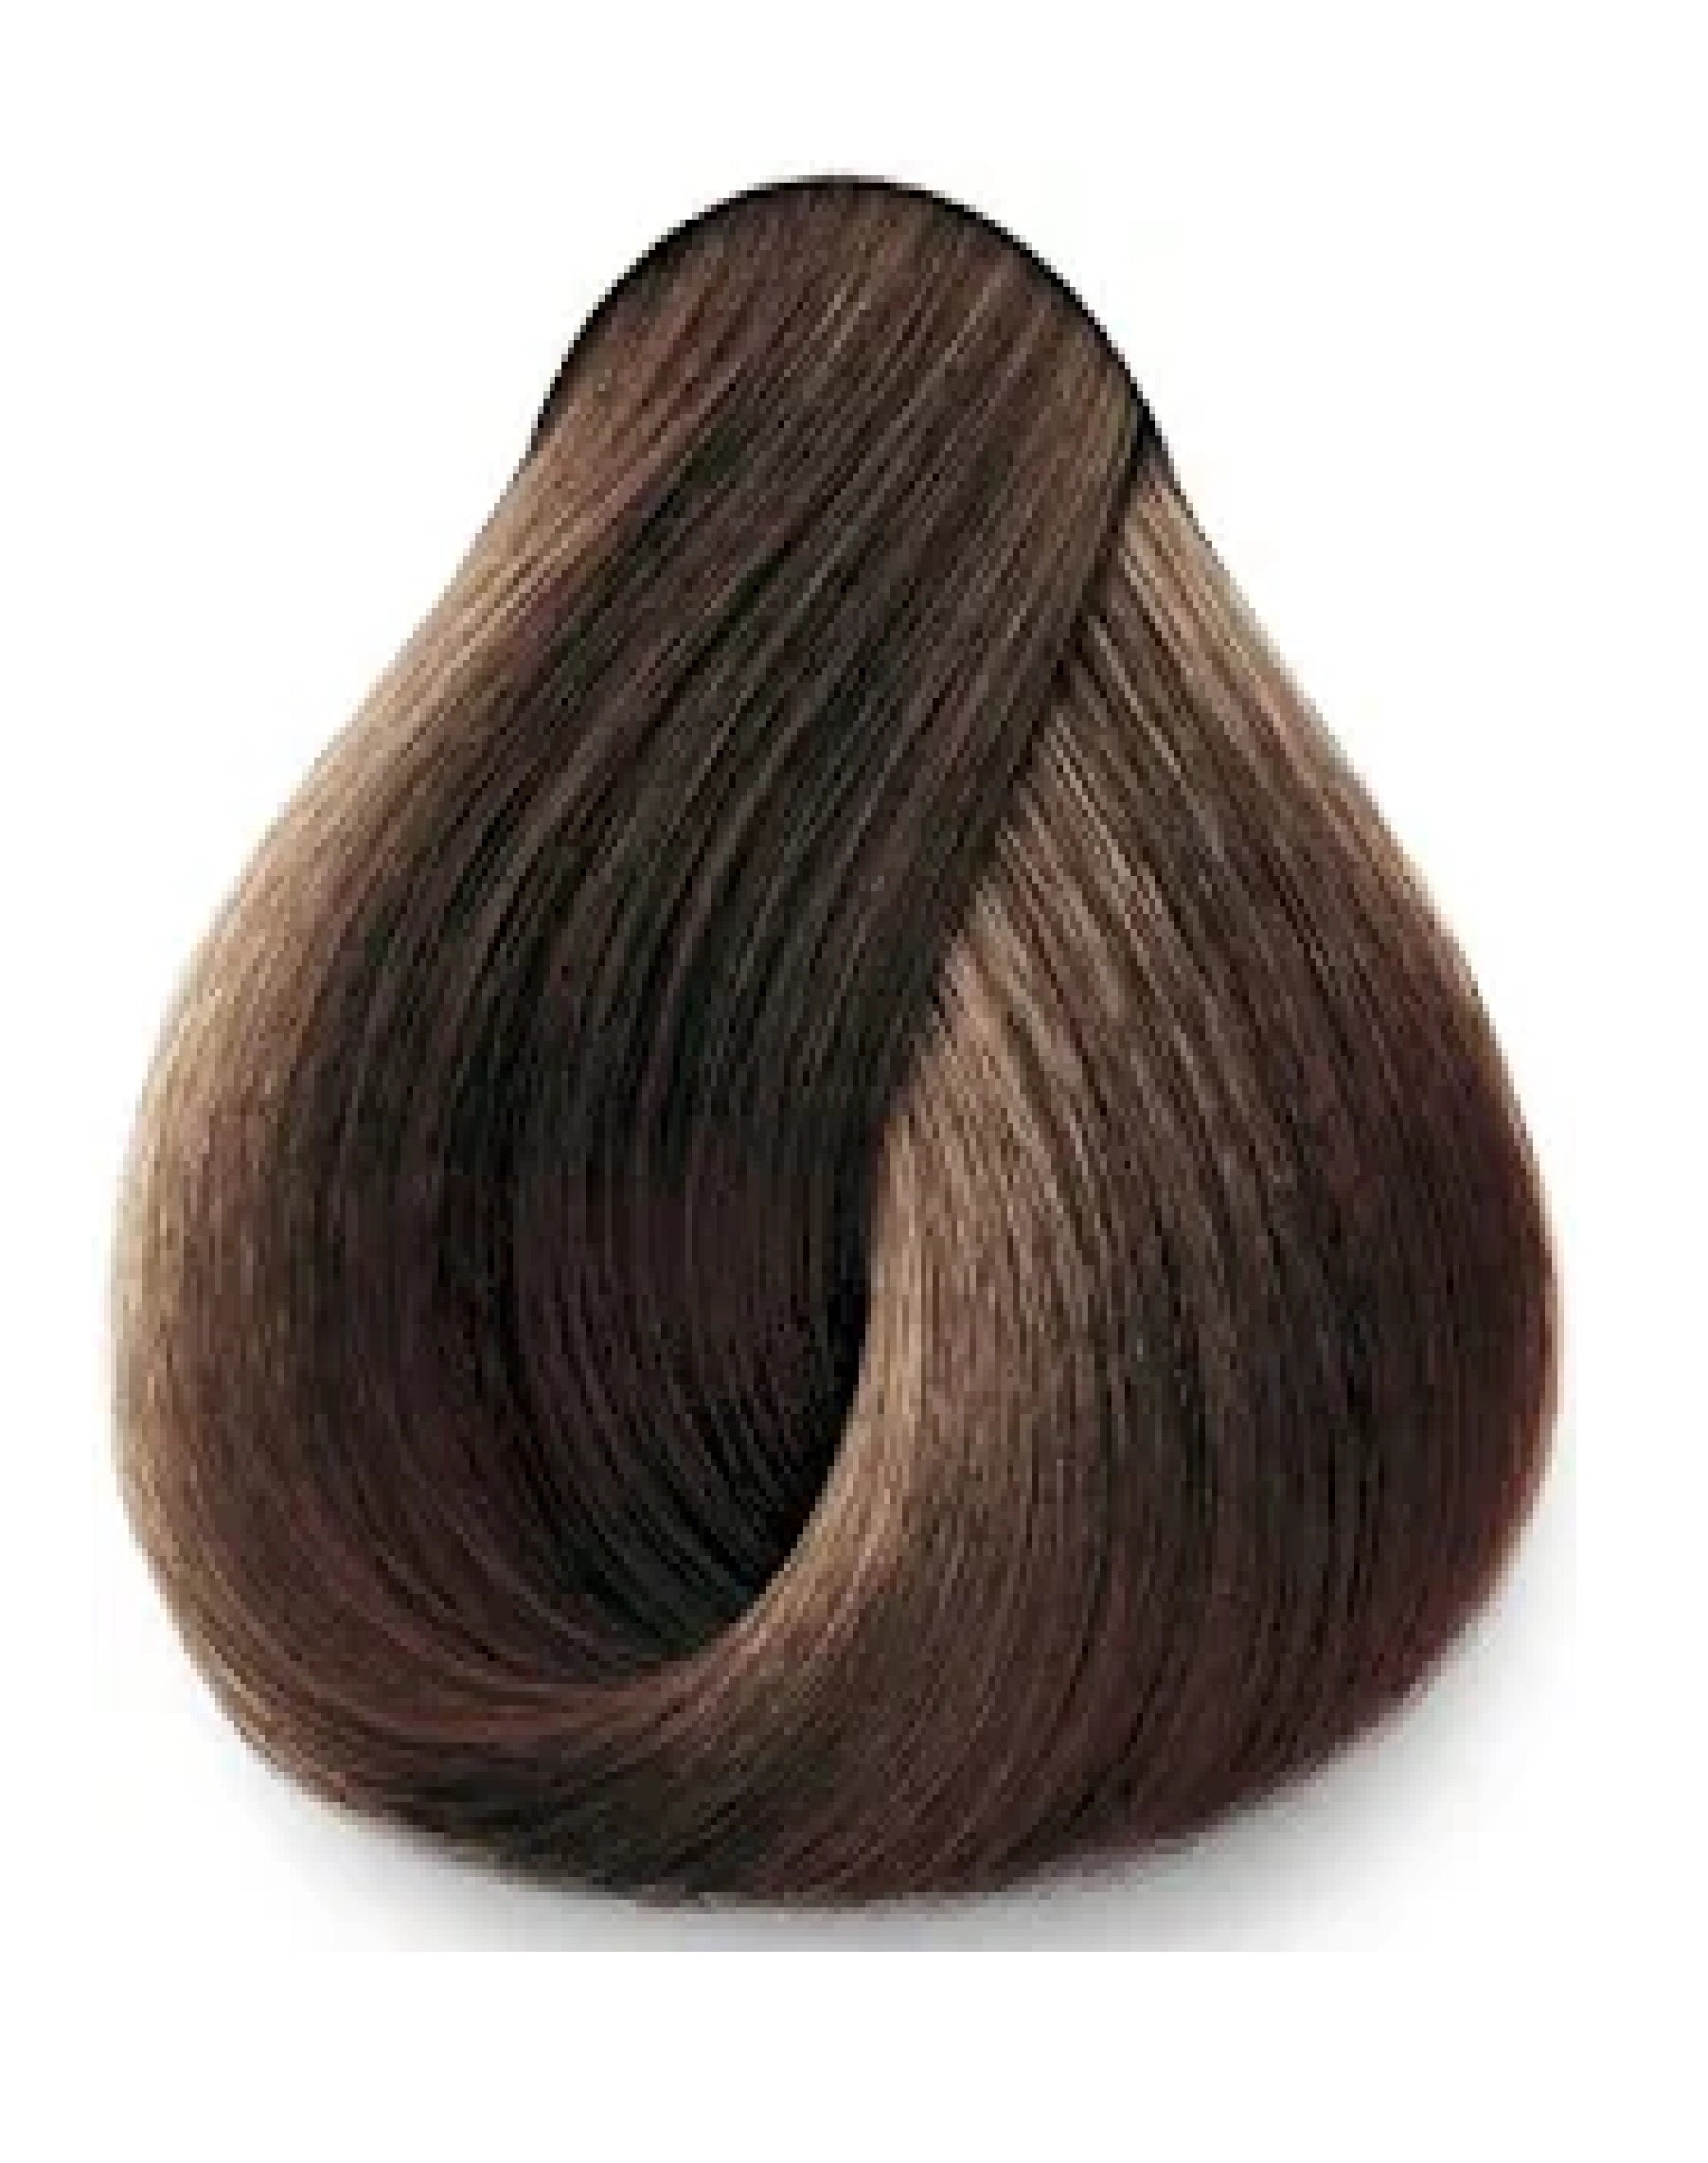 Kuul Creme Hair Color Brown to Blonde Permanent Dye